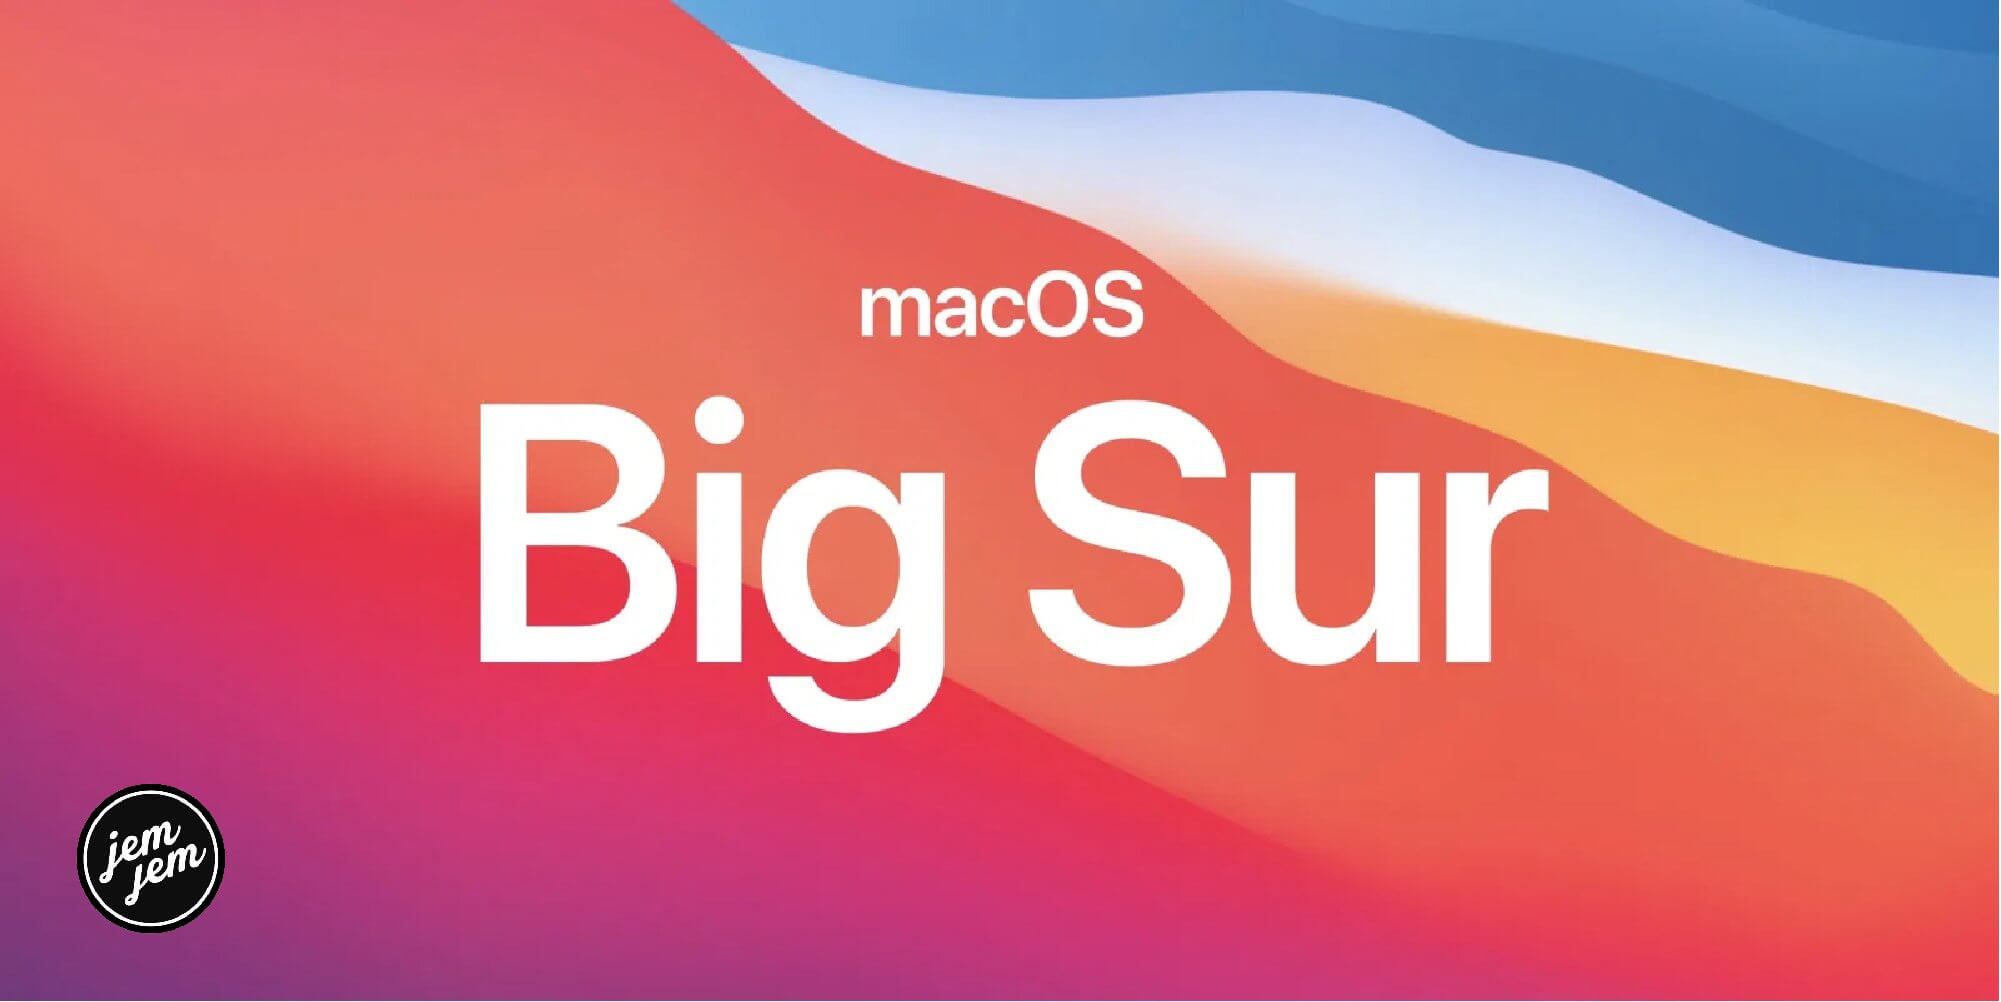 How to download and install macOS Big Sur beta 2 to your Mac